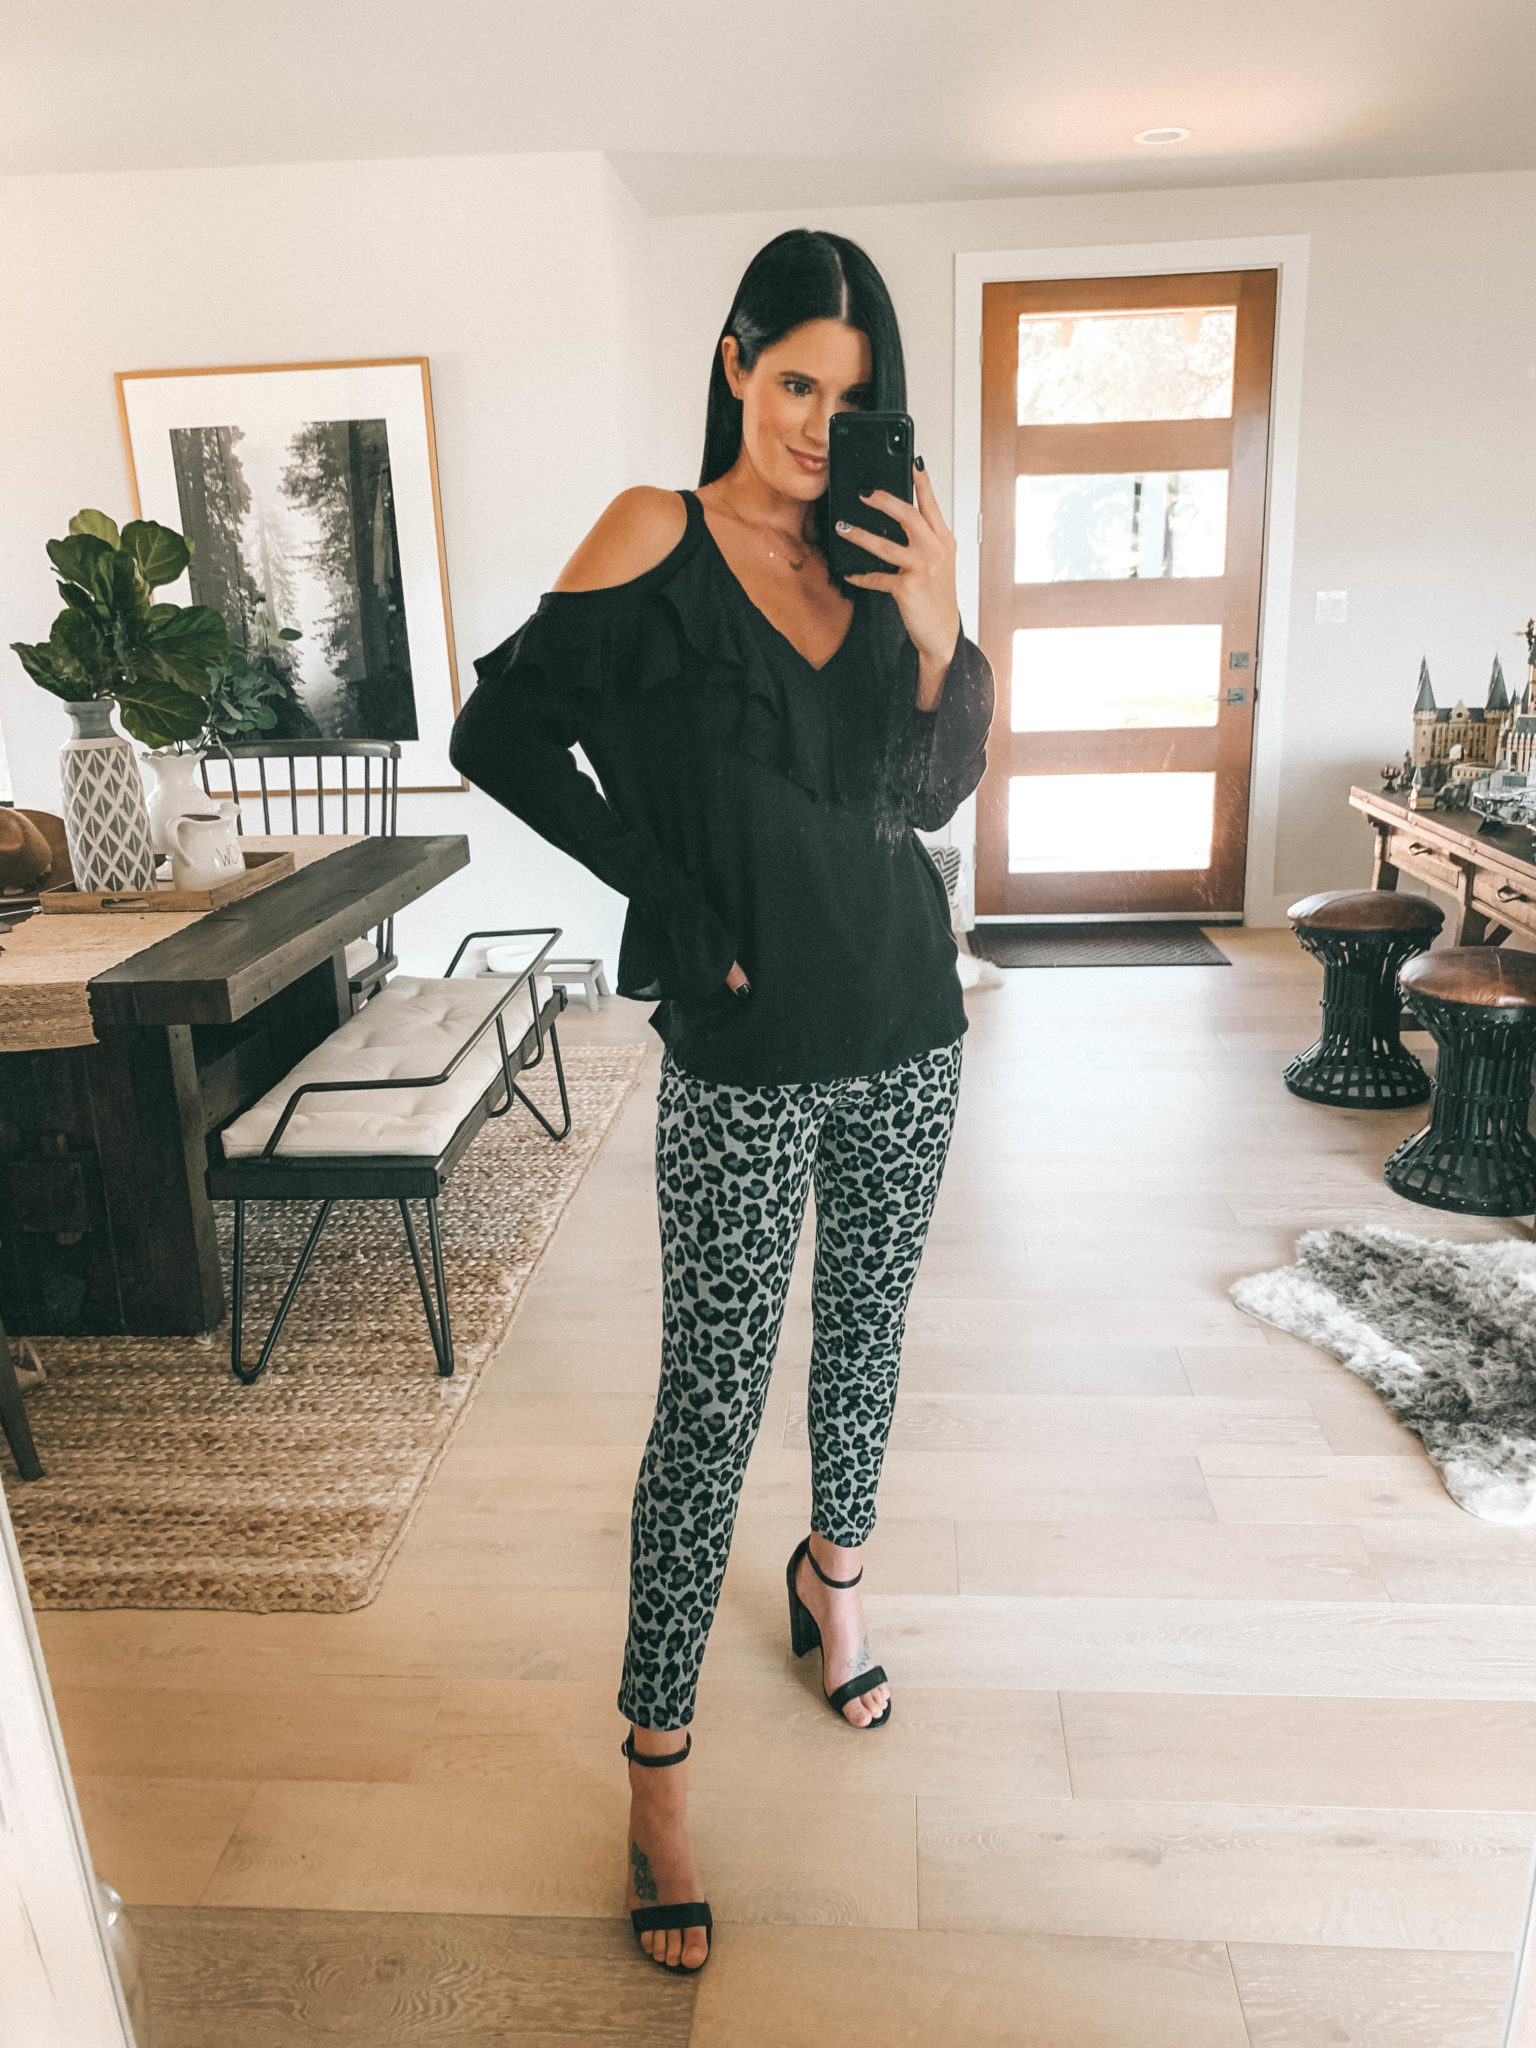 7 Affordable Fall Outfits from Walmart by popular Austin fashion blog, Dressed to Kill: image of a woman standing inside her house and wearing a black Walmart Sofia Jeans Cold-Shoulder Ruffle Neck Woven Top and Sofia Jeans Sofia Skinny Leopard Print Mid Rise Stretch Ankle Jean.